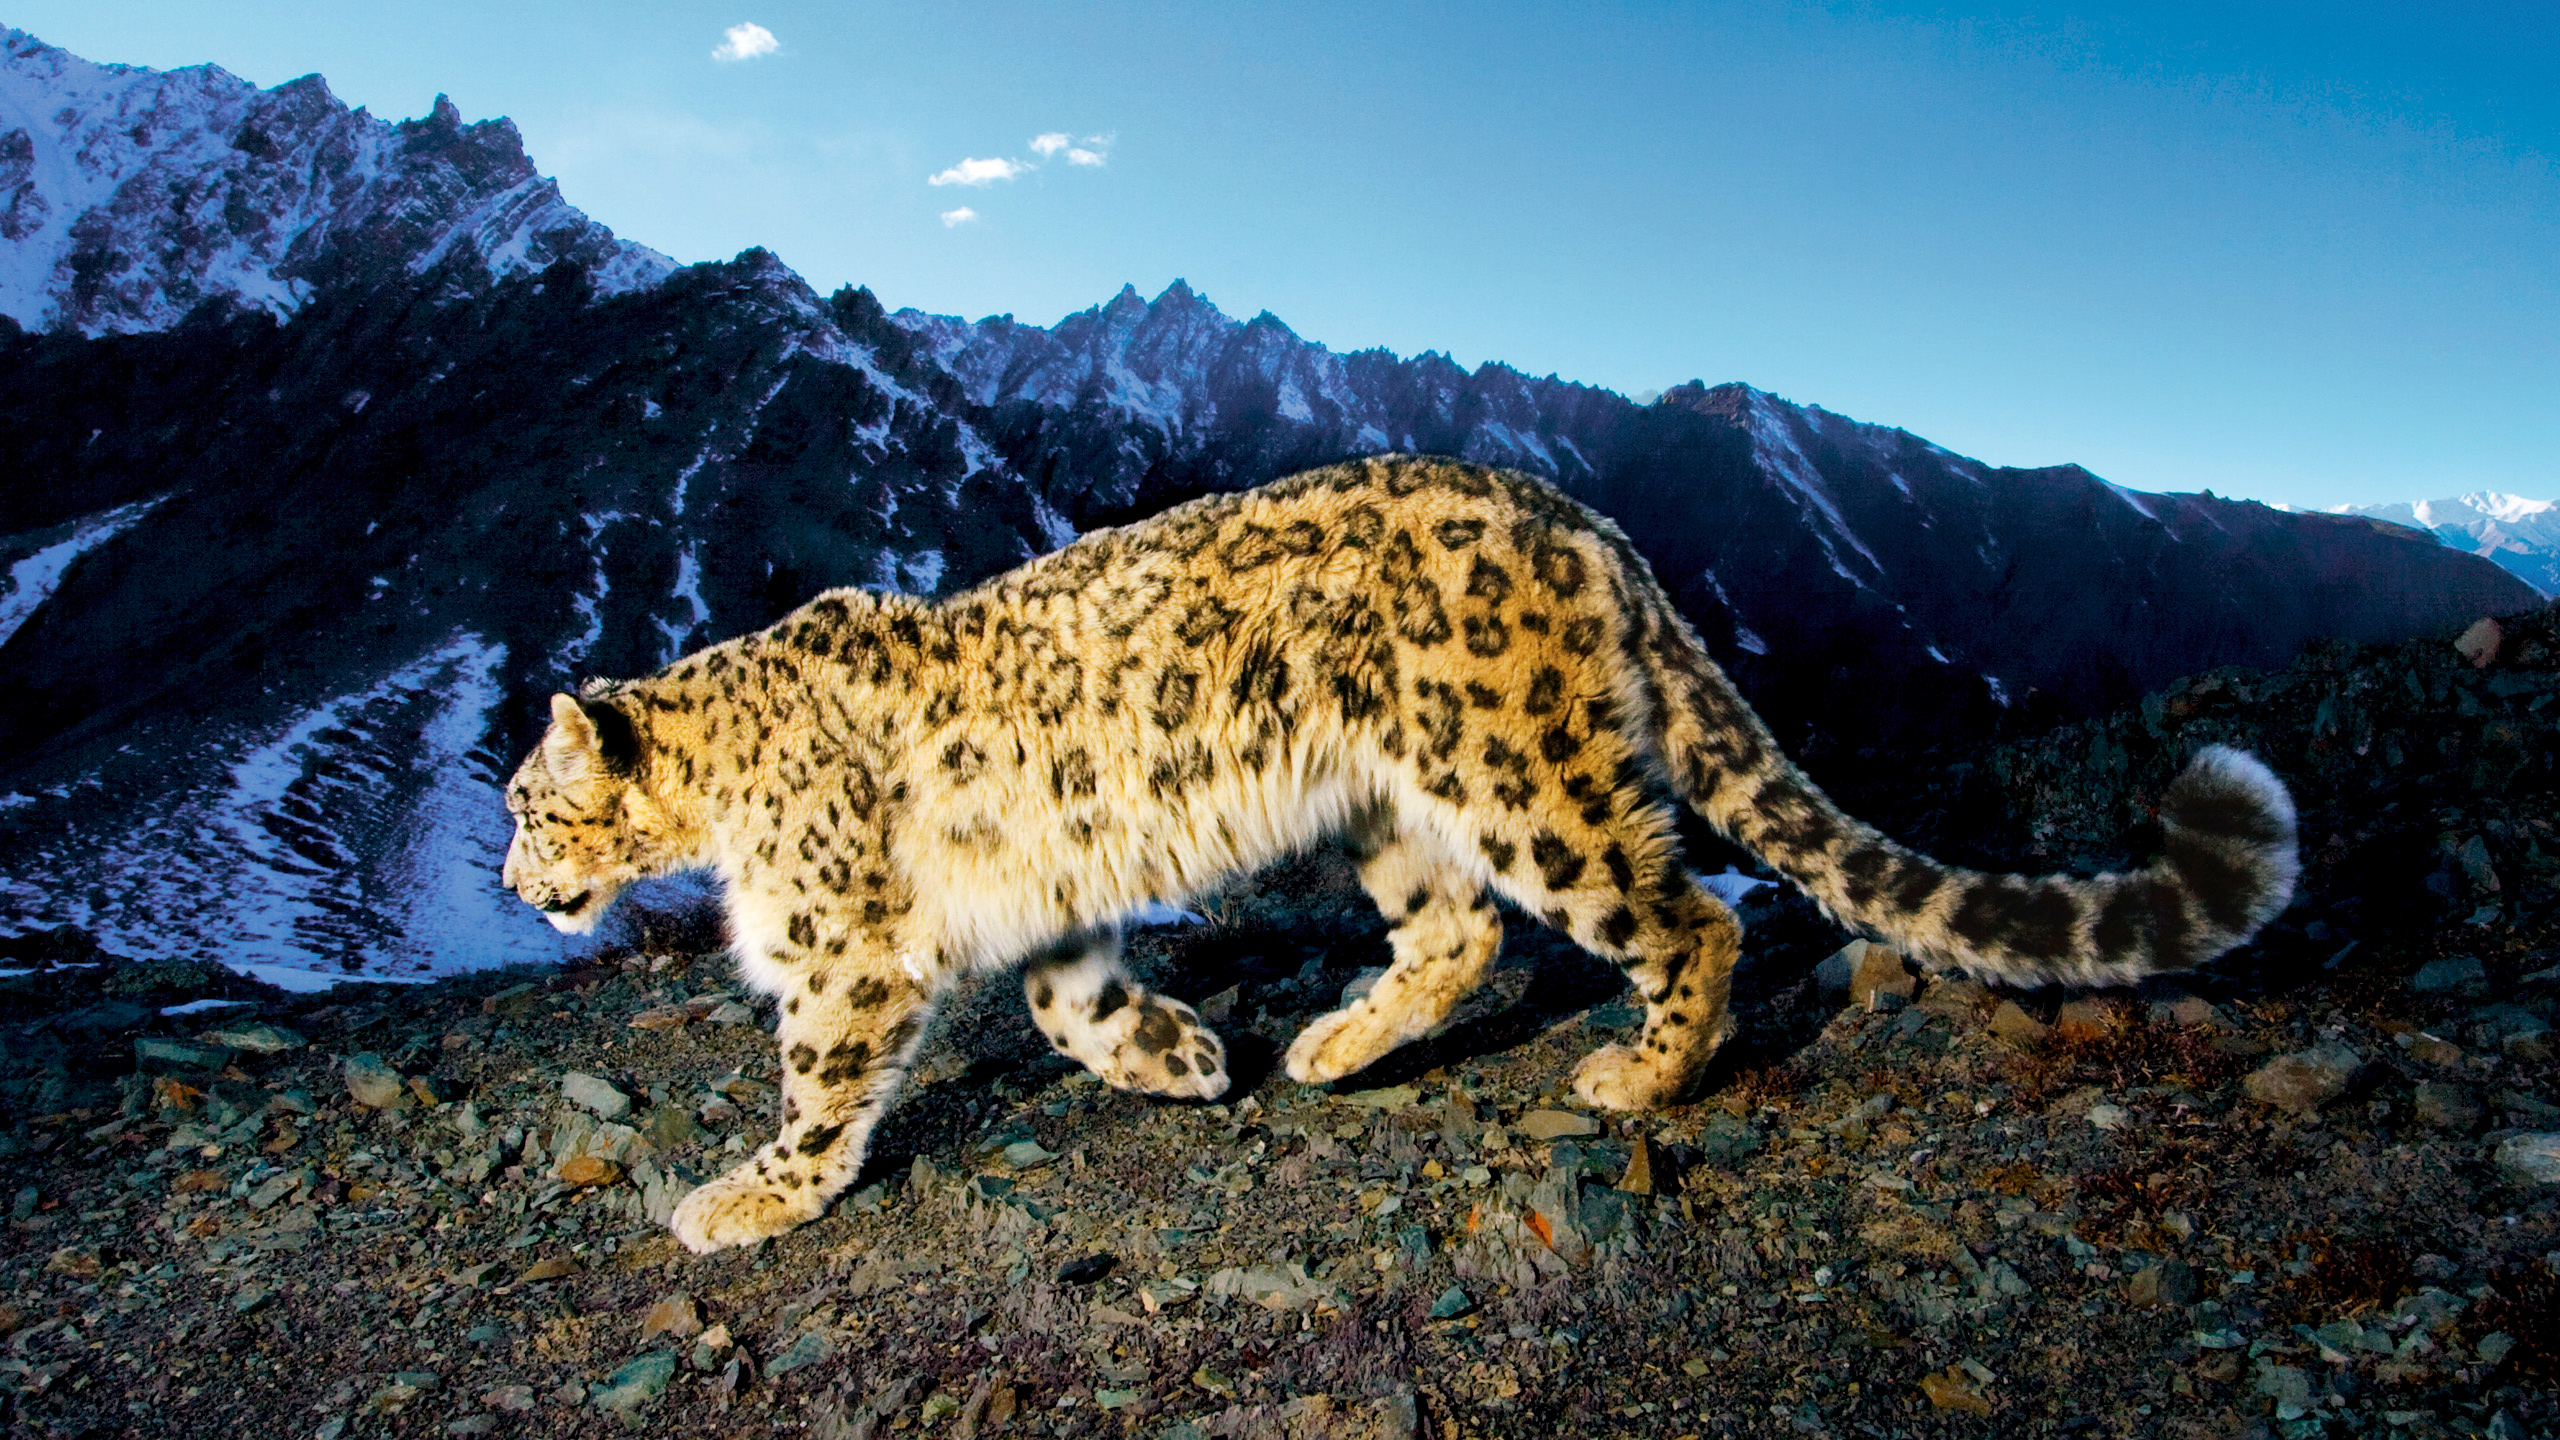 Prowling Snow Leopard883708549 - Prowling Snow Leopard - Snow, Prowling, Leopard, African